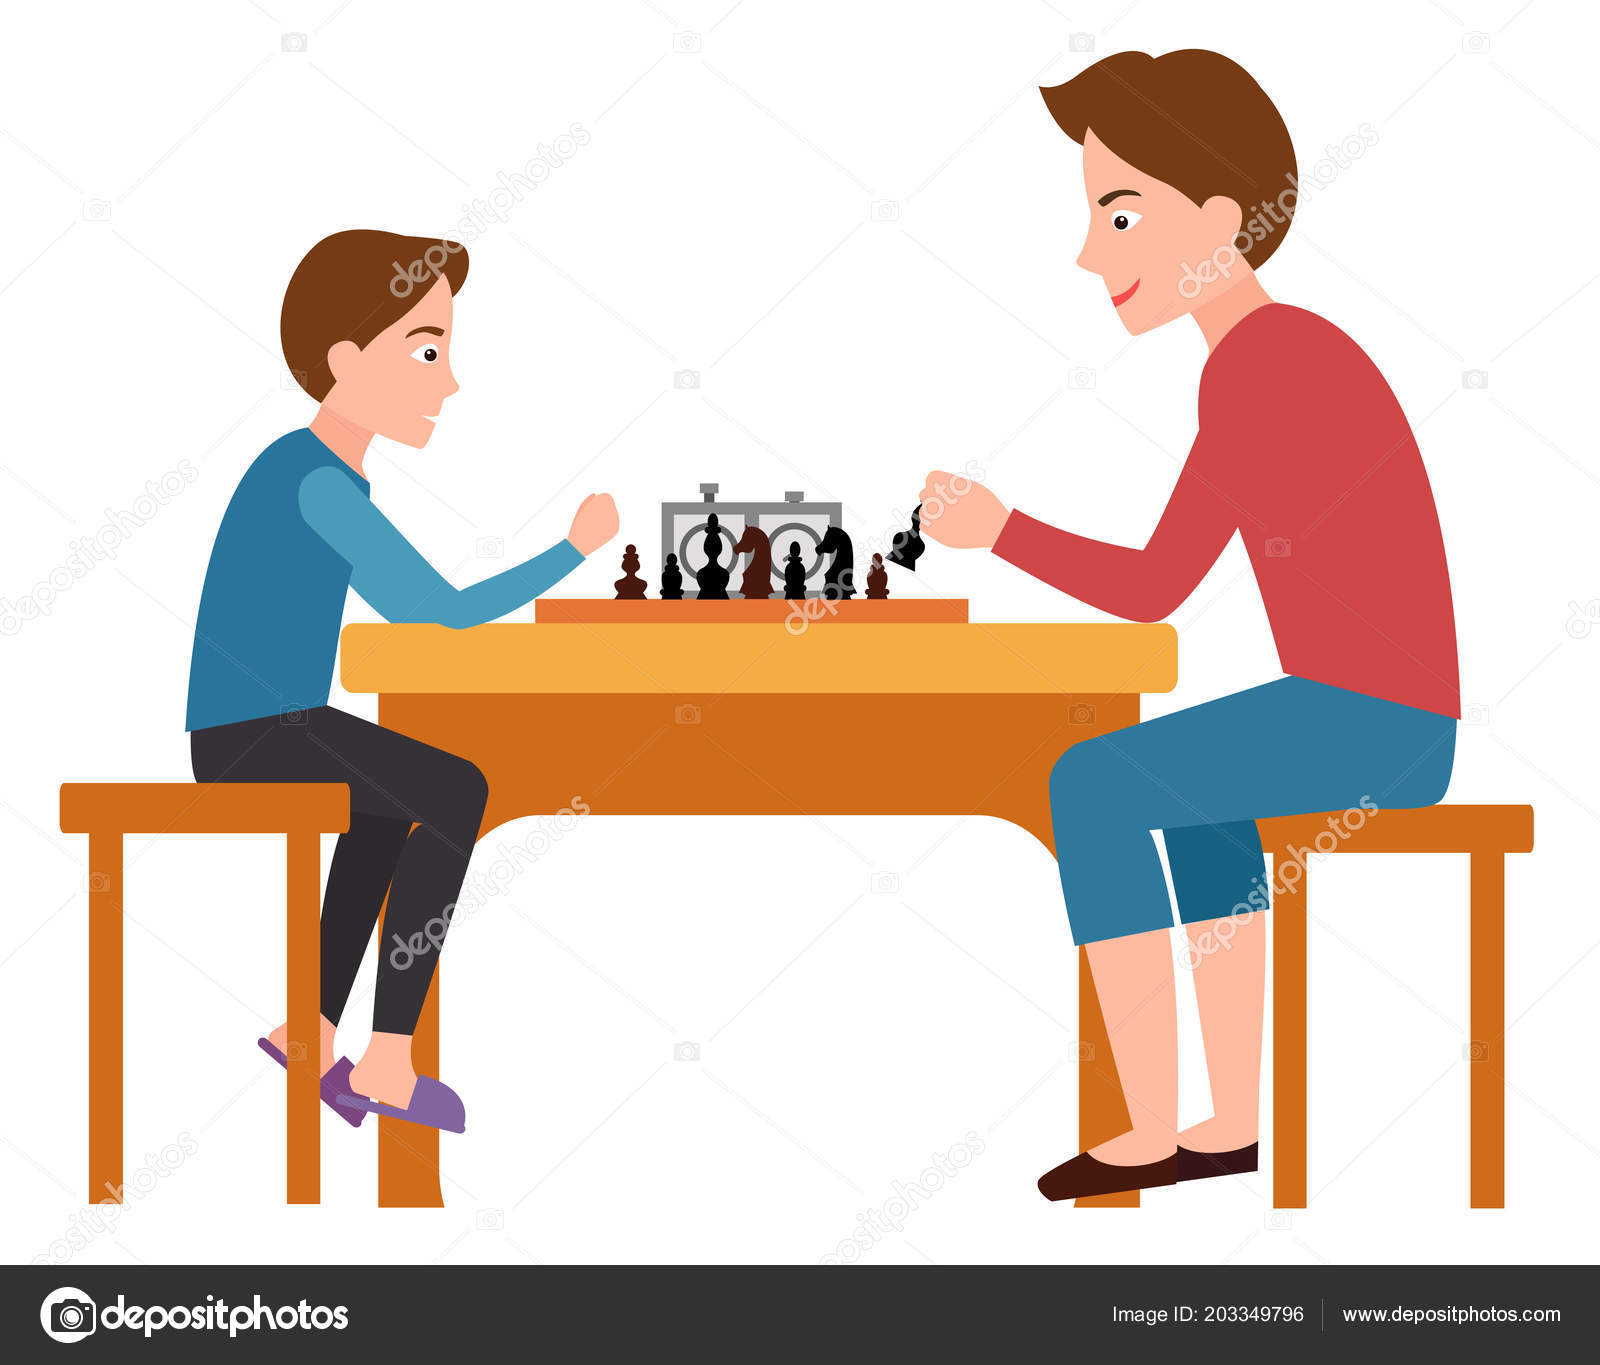 Chess players two man sitting and playing Vector Image